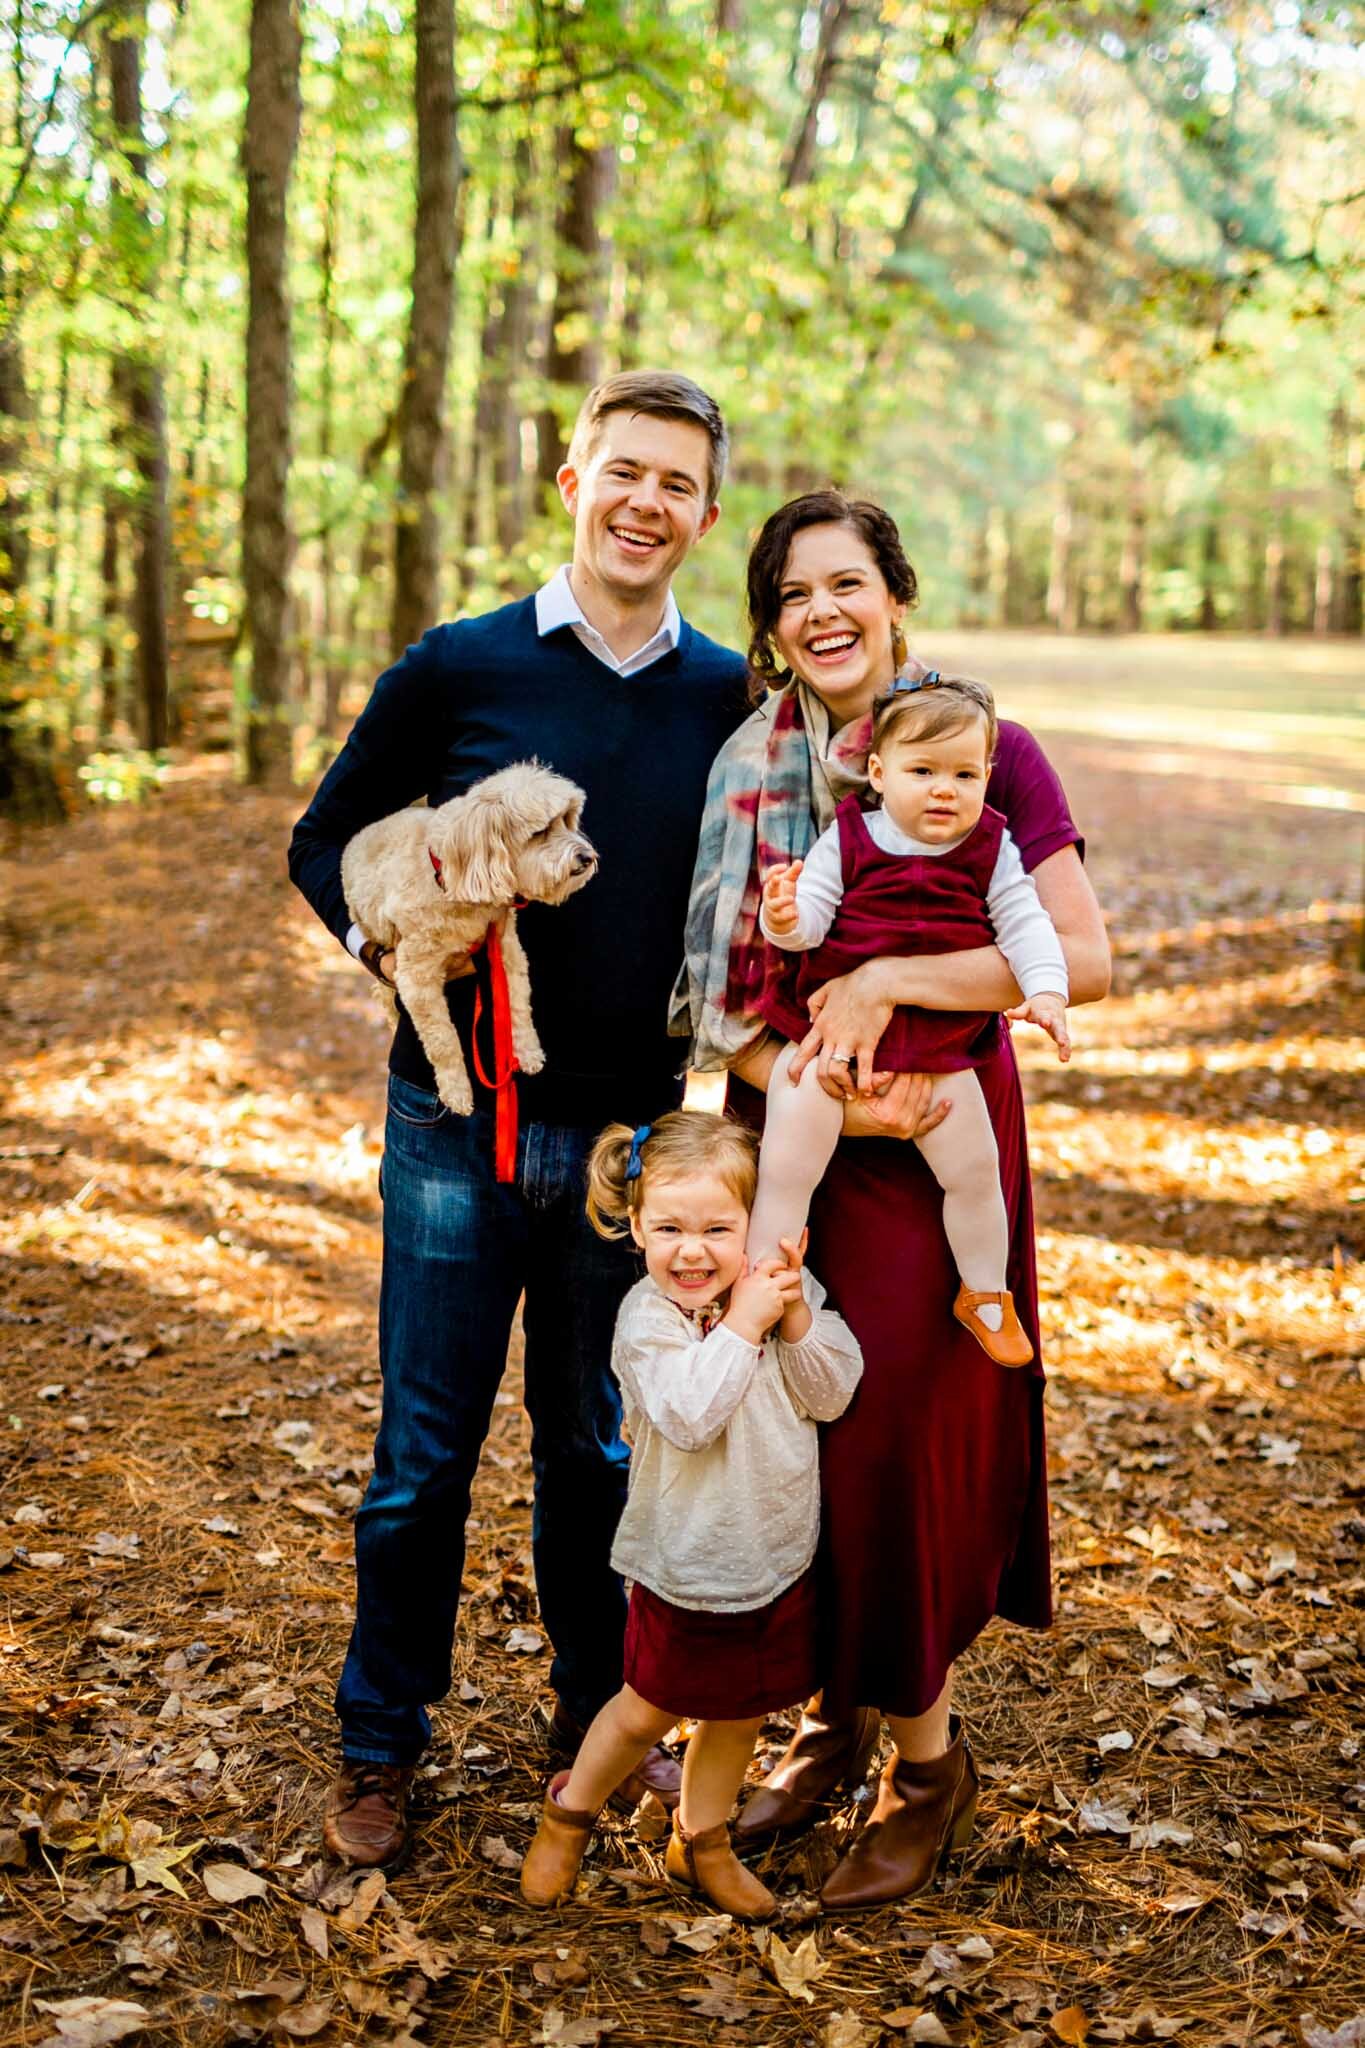 Raleigh Family Photographer | By G. Lin Photography | Umstead Park | Fall family portrait | Family holding dog and children and smiling